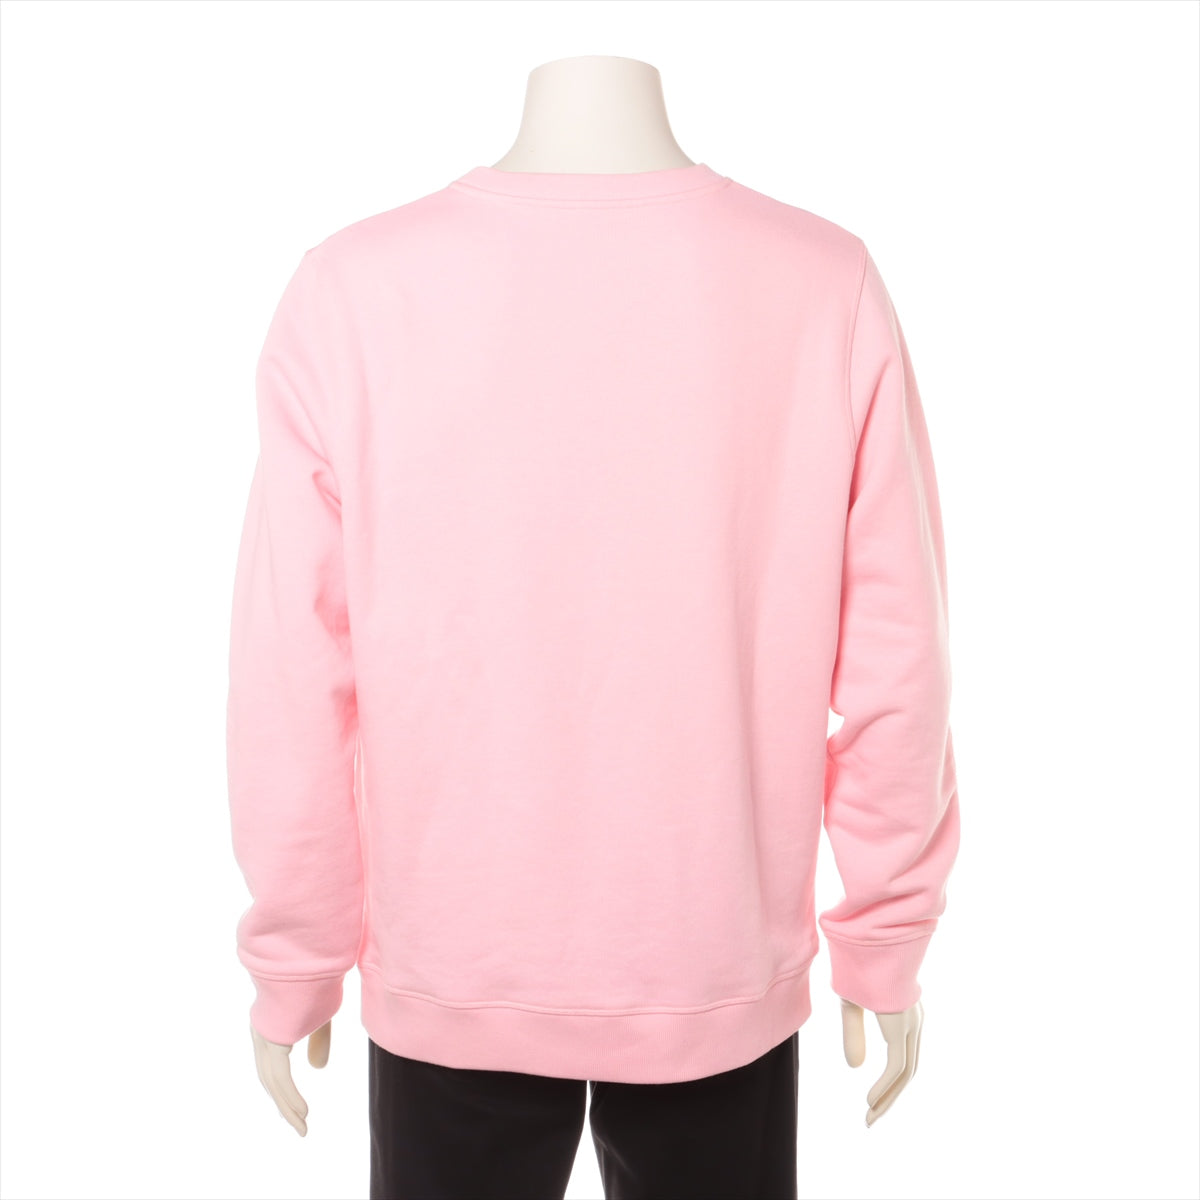 Loewe Anagram Cotton Basic knitted fabric L Unisex Pink  H6109900CR